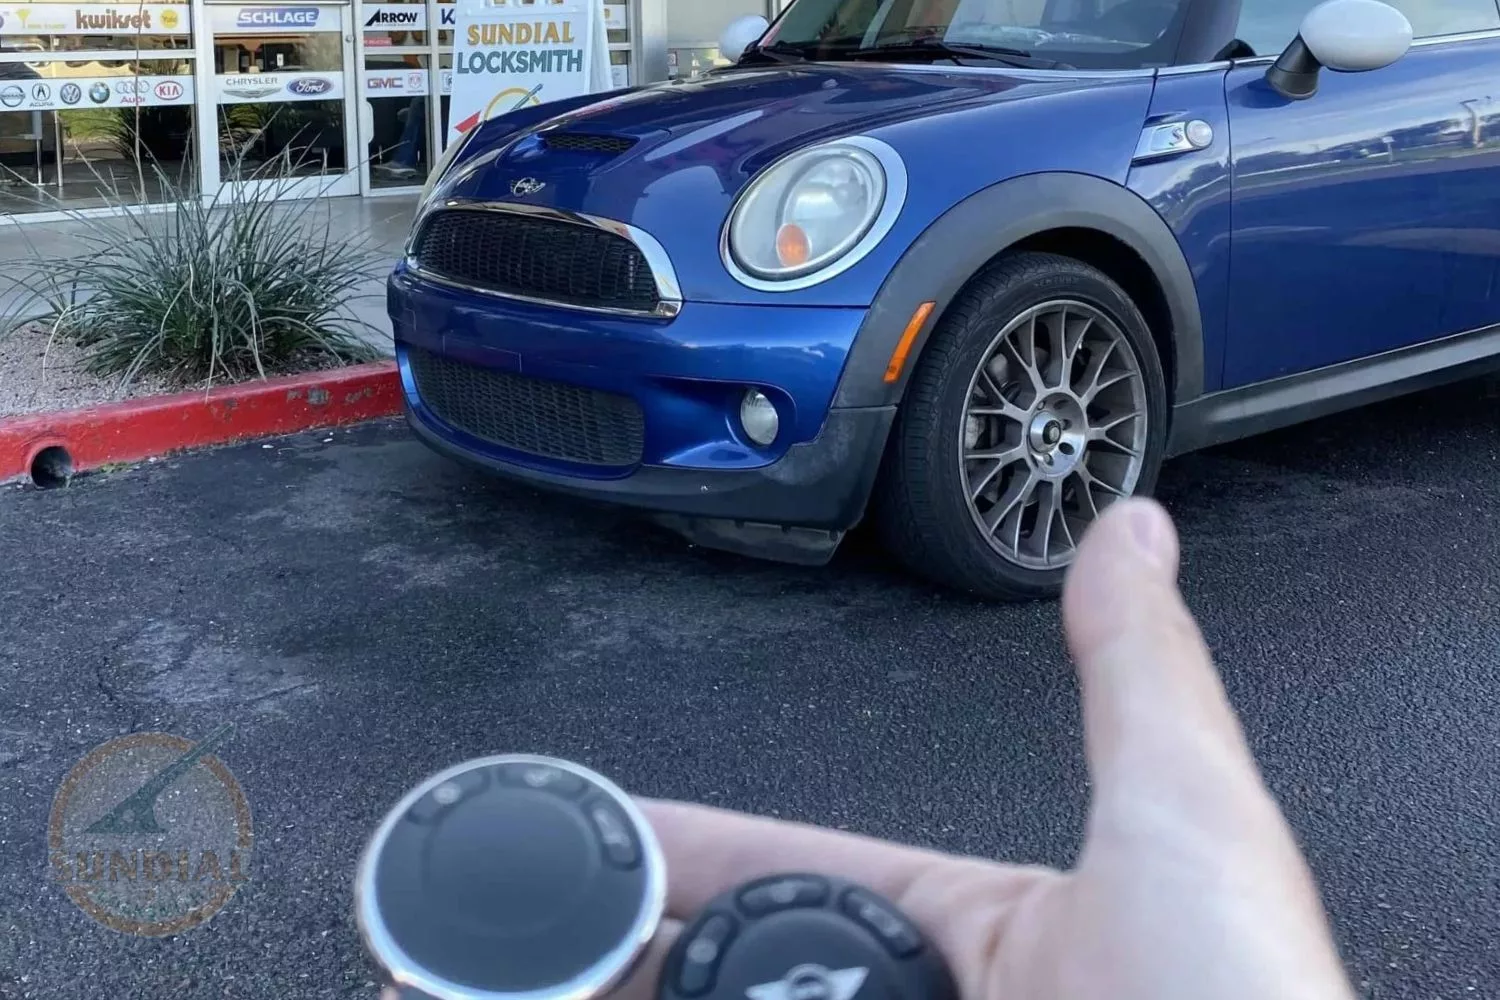 Blue Mini Cooper with key fob in foreground.